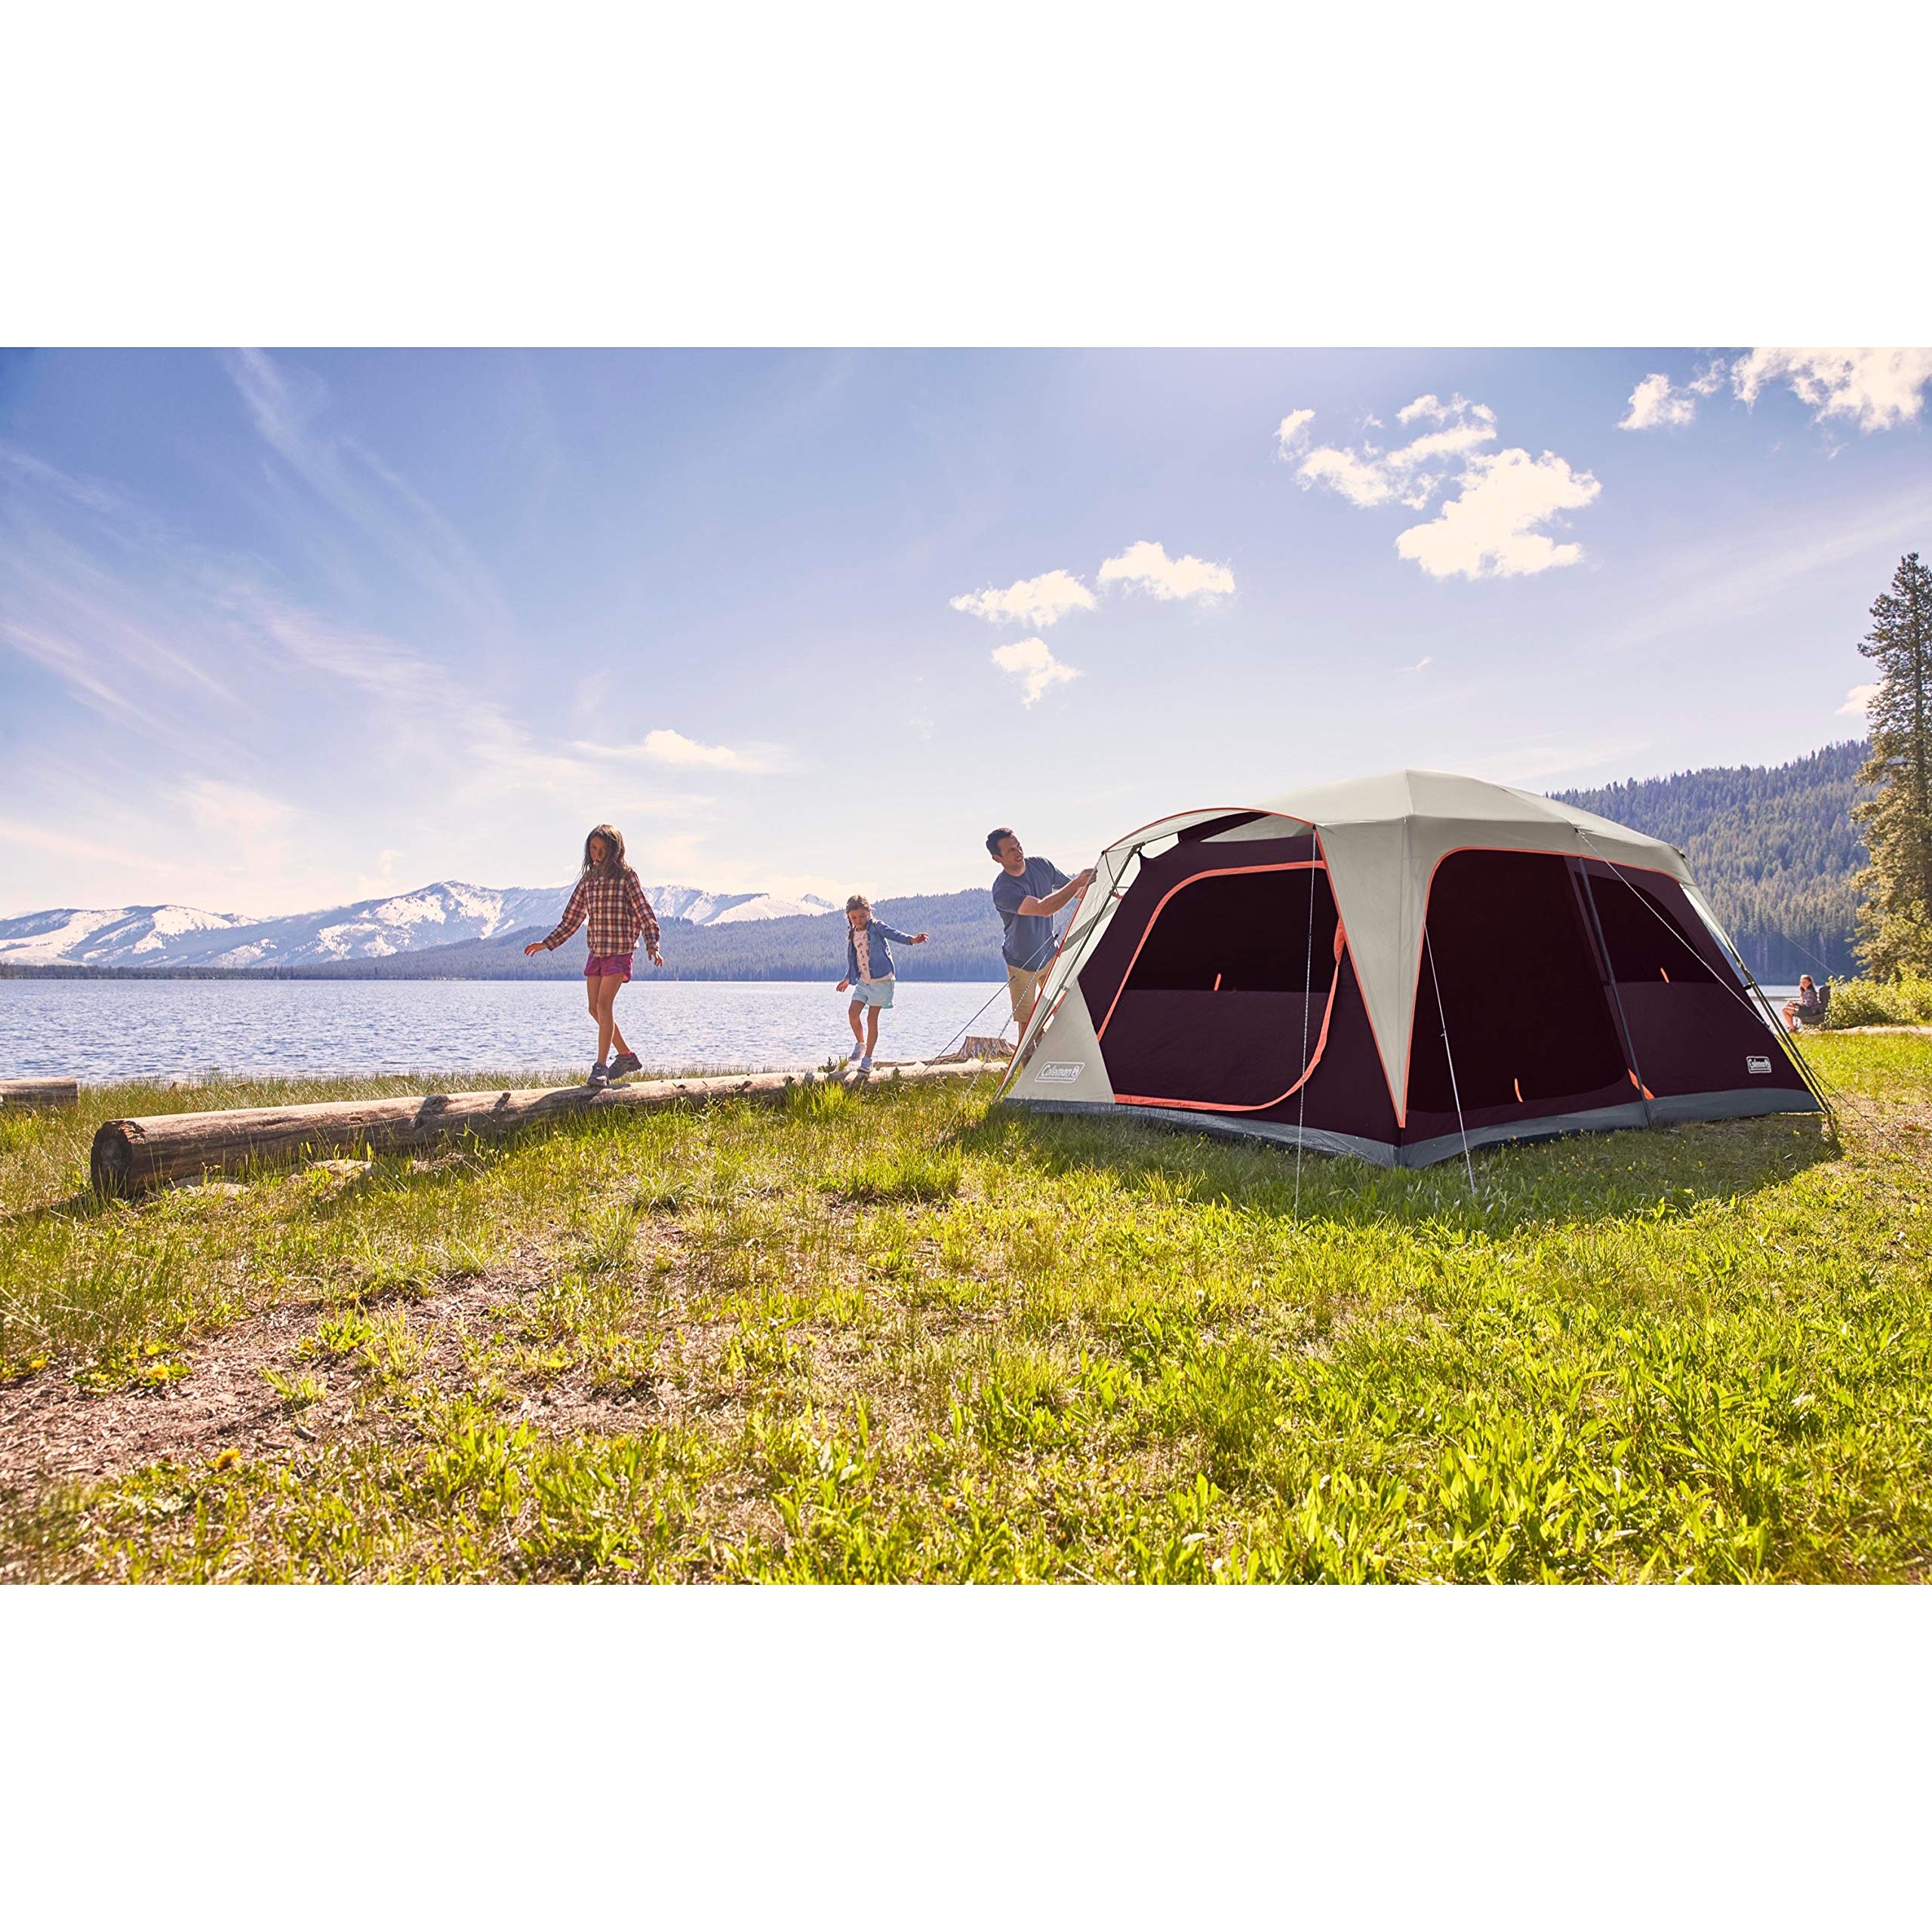 Coleman Skylodge Camping Tent, 8/10/12 Person Weatherproof Family Tent with Convertible Screen Room, Color-Coded Poles, Room Divider, Rainfly, and Storage Pockets, Fits Multiple Queen-Sized Airbeds